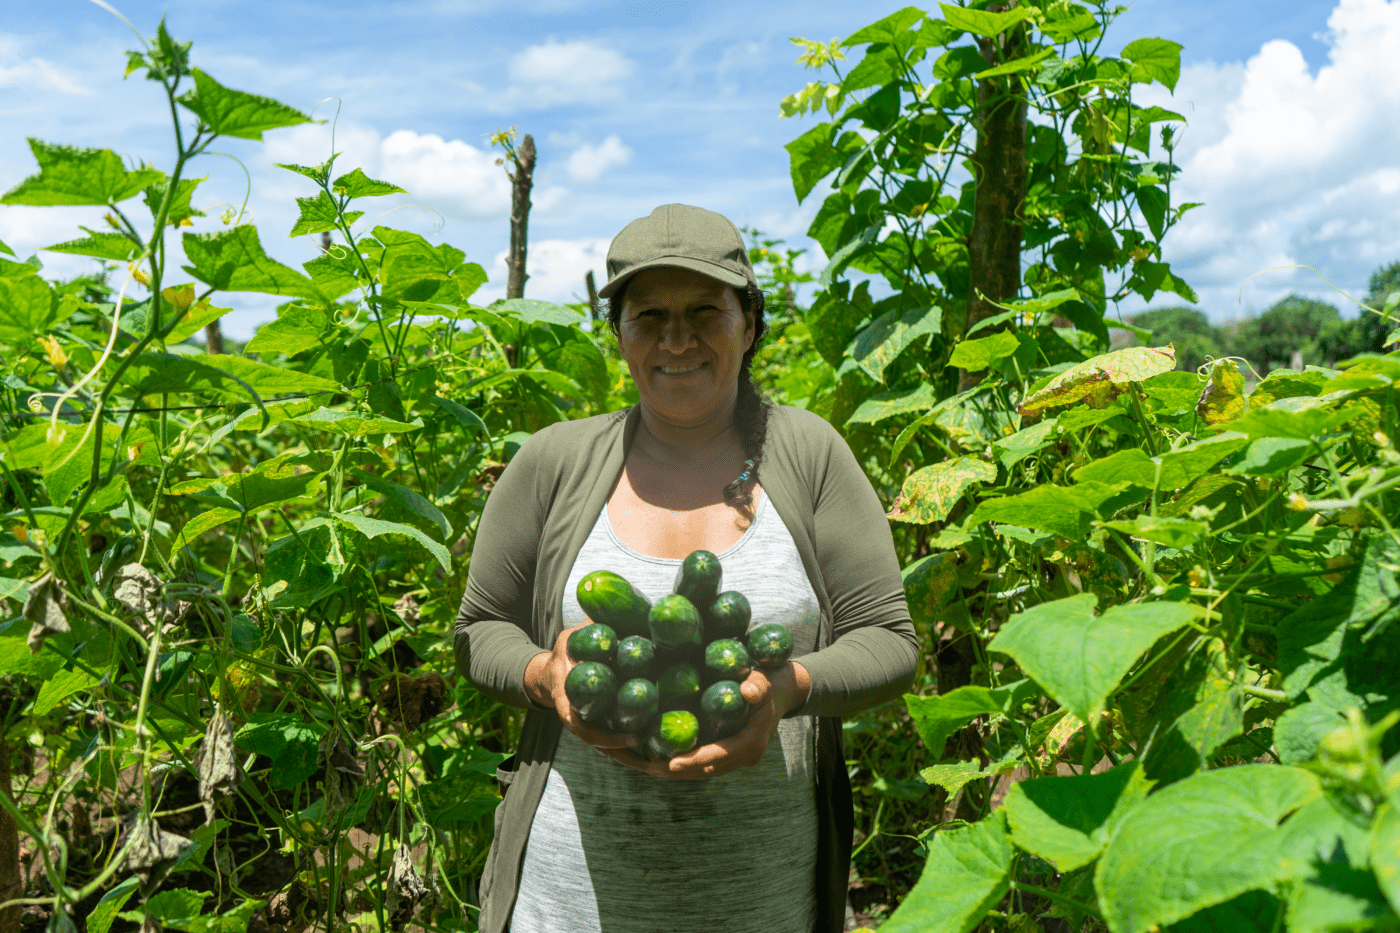 Women supported by WFP in El Salvador